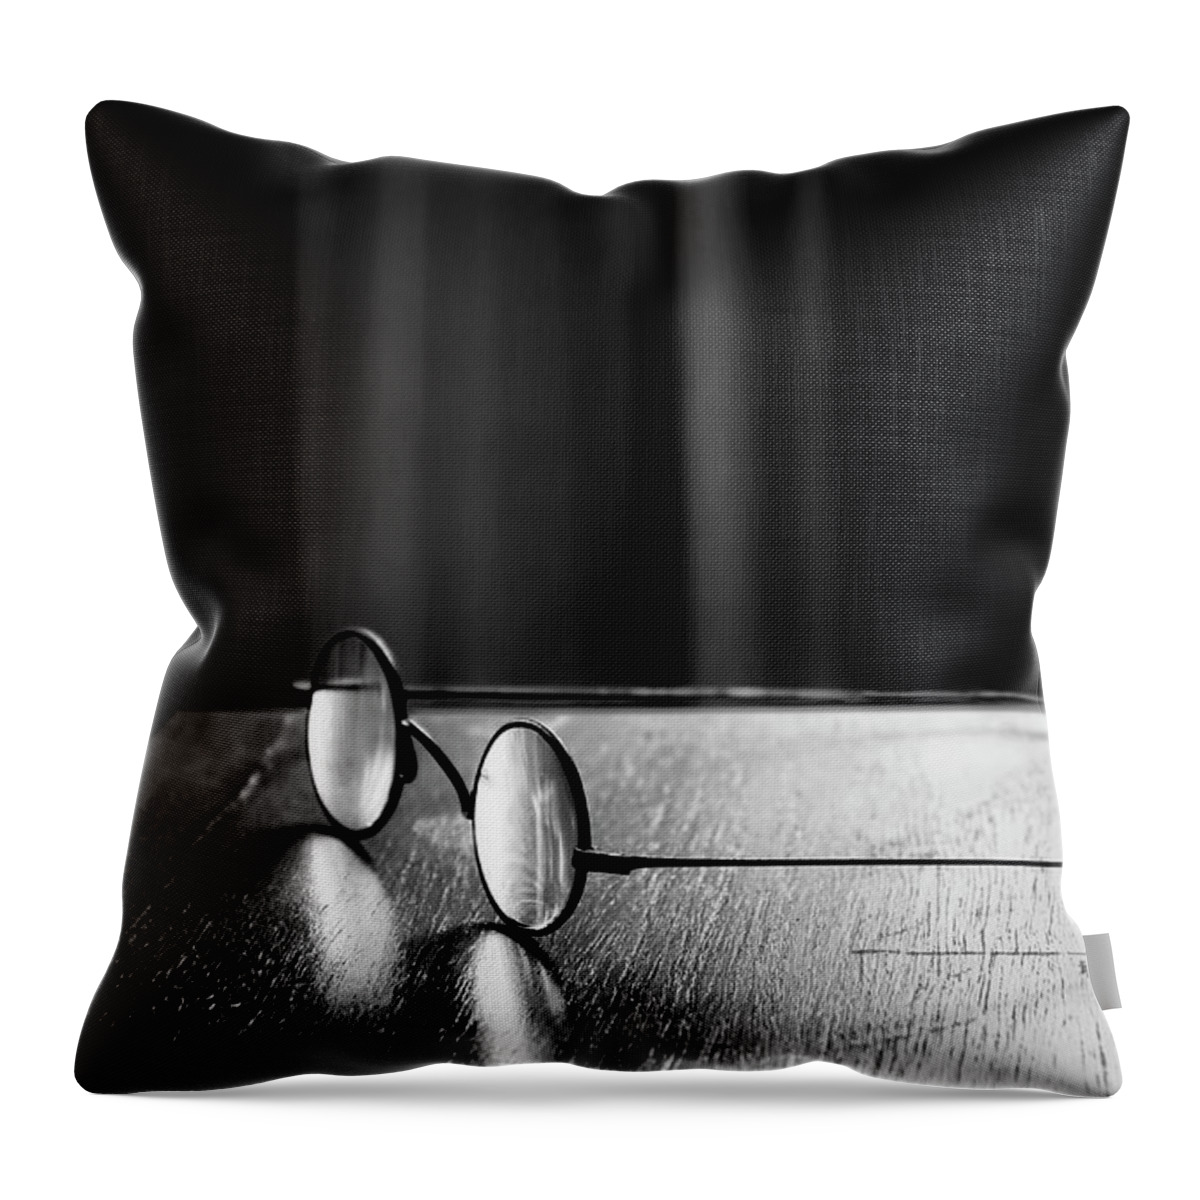 Minimalist Throw Pillow featuring the photograph Eyeglasses - Spectacles by Nikolyn McDonald